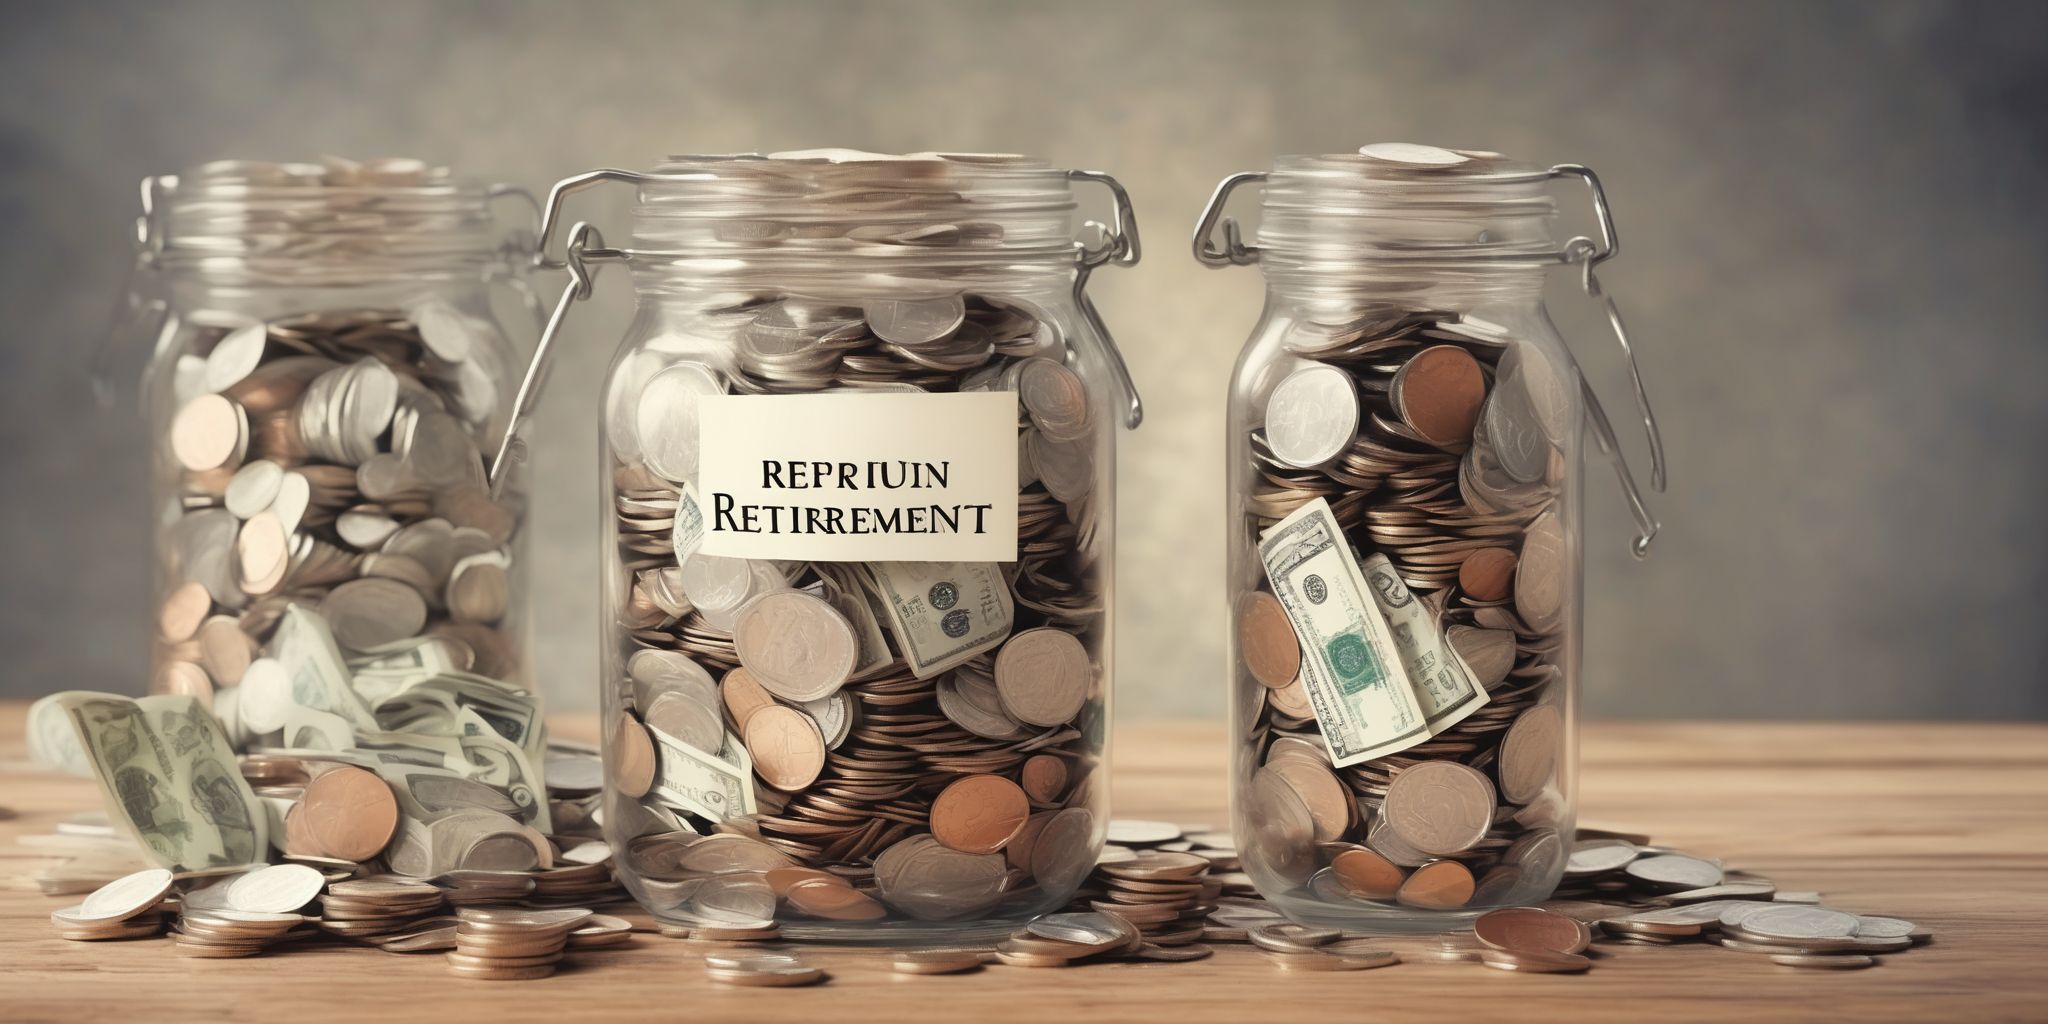 Retirement fund  in realistic, photographic style